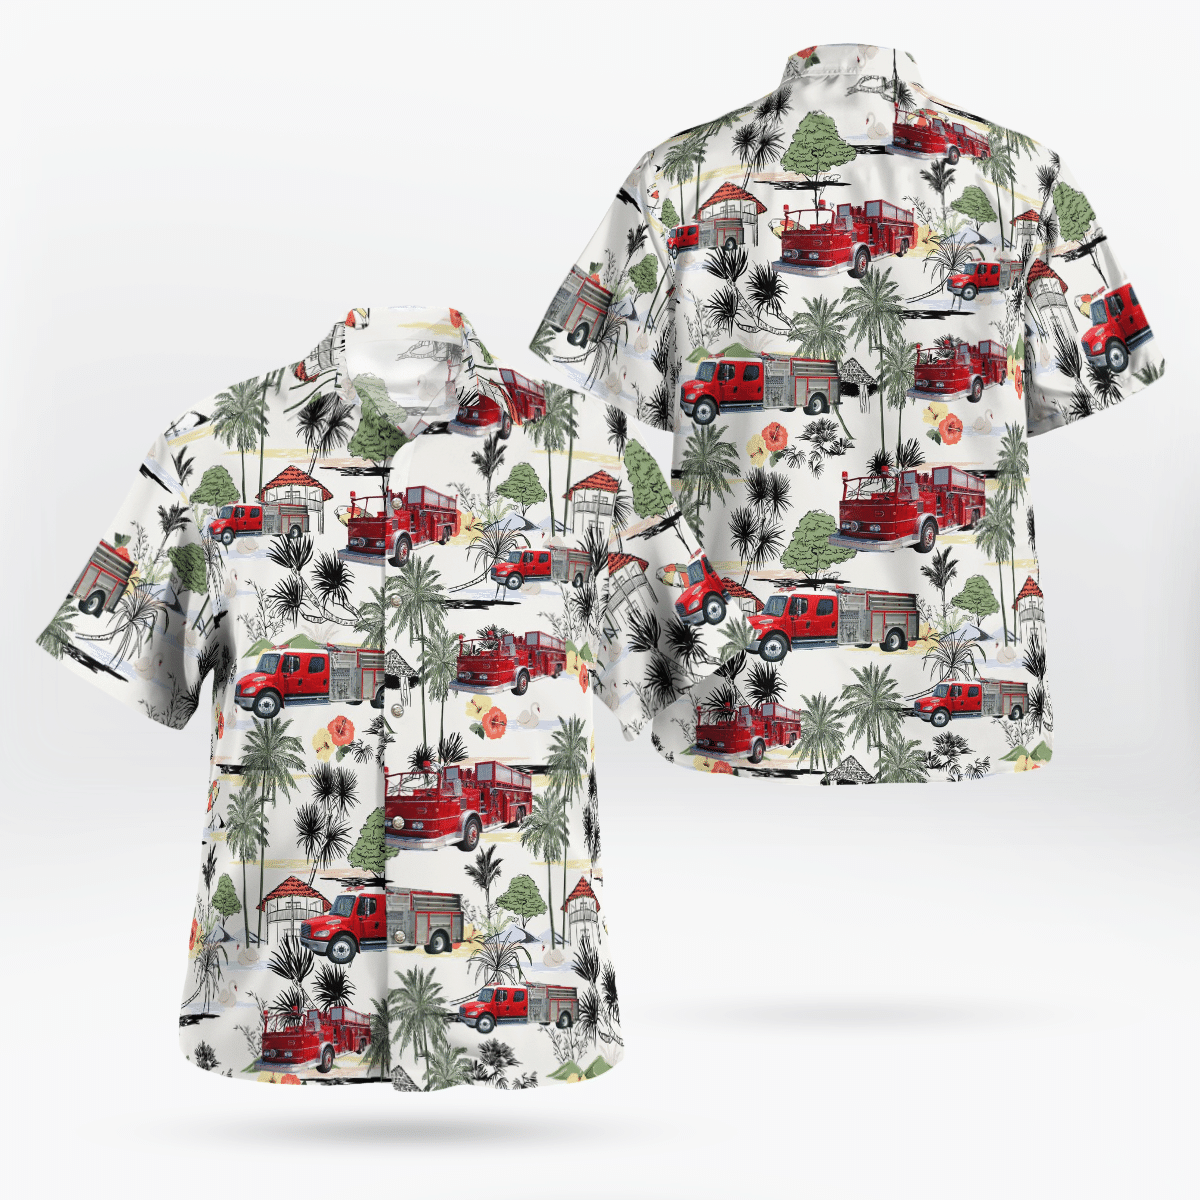 Shop now to find the perfect Hawaii Shirt for your hobby 23